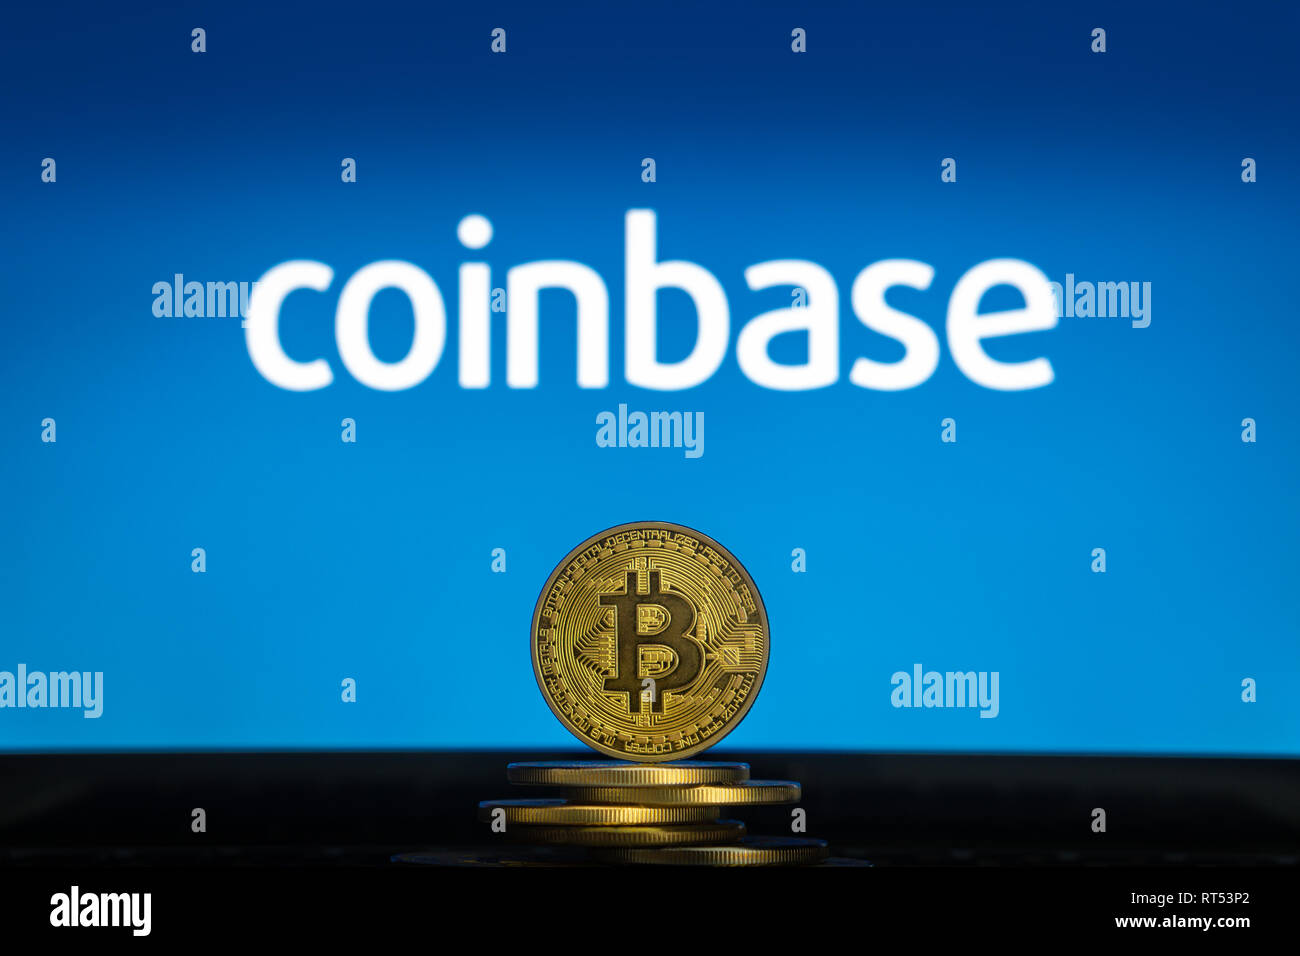 Bitcoin on a stack of coins with Coinbase logo on a laptop screen. Cryptocurrency and blockchain adoption getting mainstream. Slovenia - 02 24 2019 Stock Photo